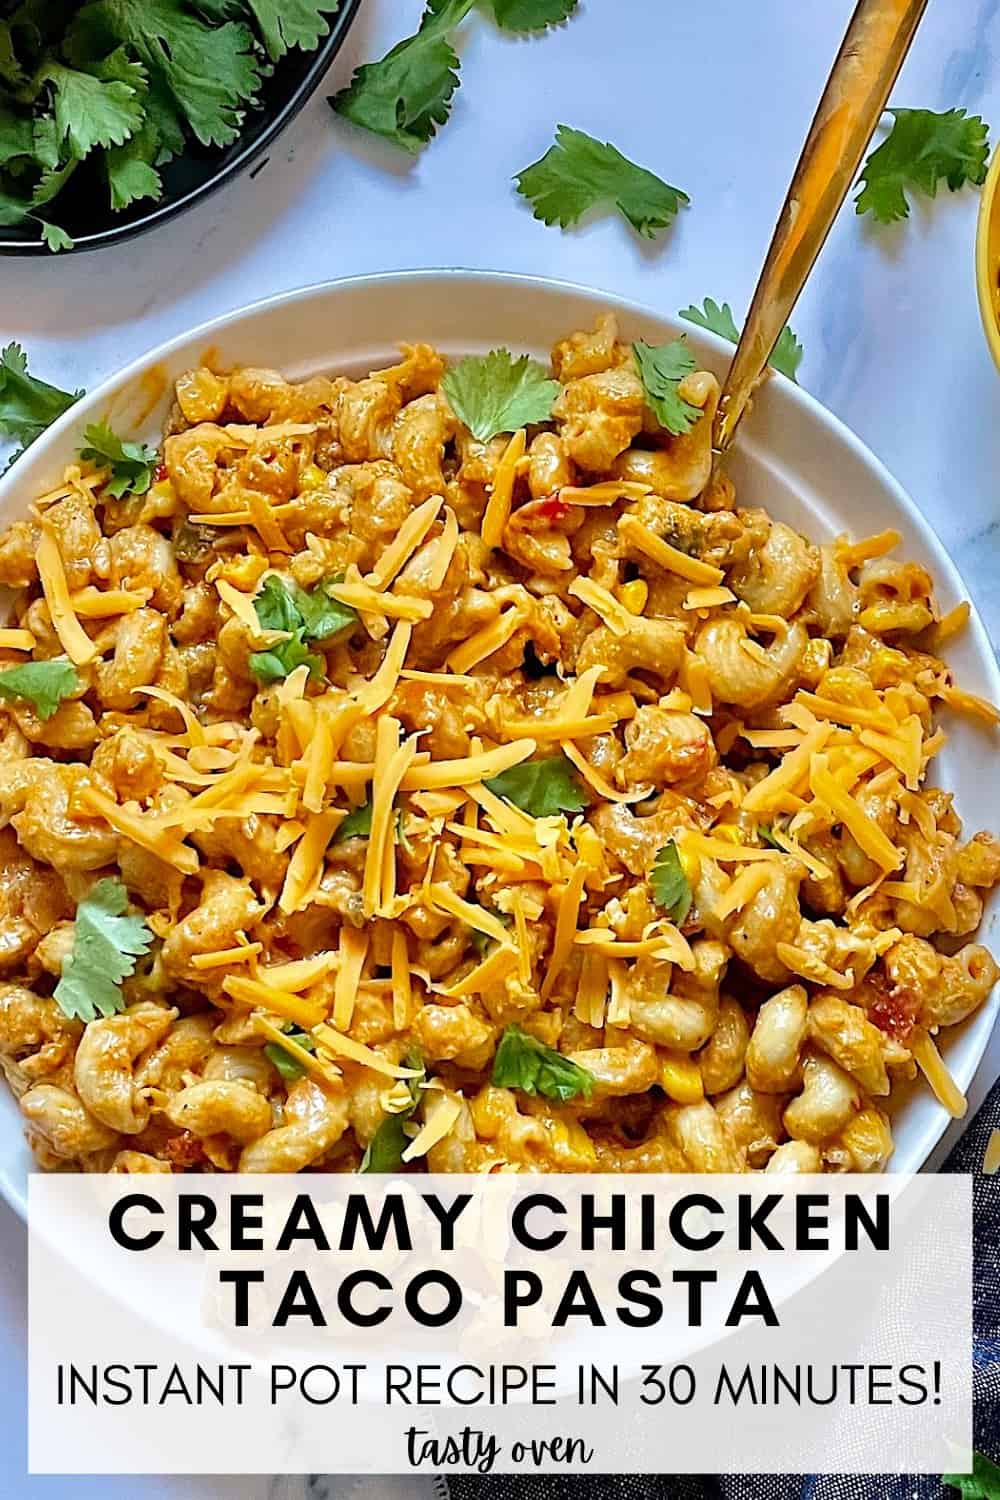 Instant Pot Taco Pasta with Chicken - 30 Minute 1 Pot Meal